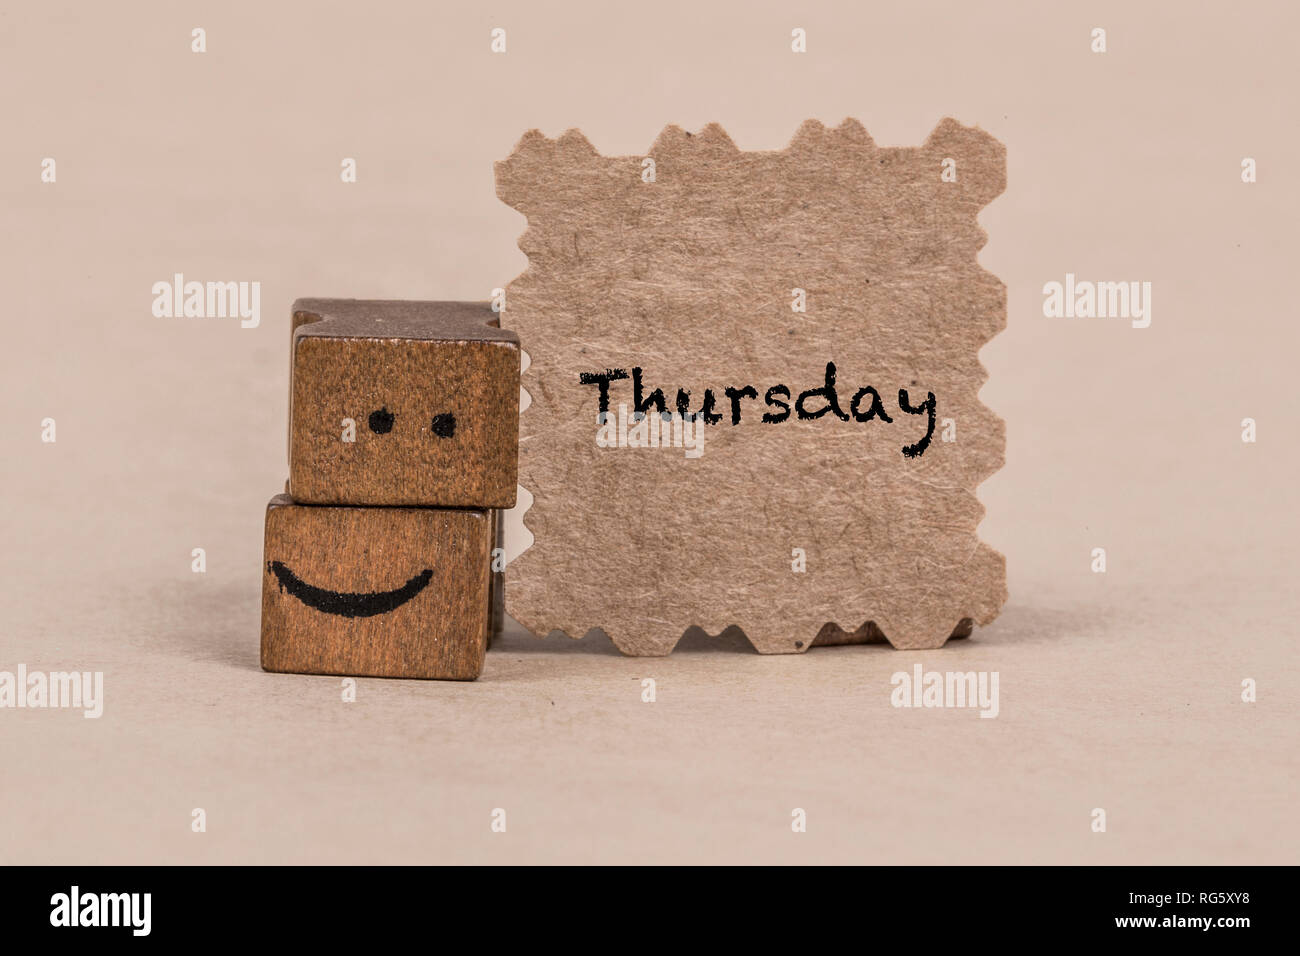 template for Thursday with smiley face icon Stock Photo